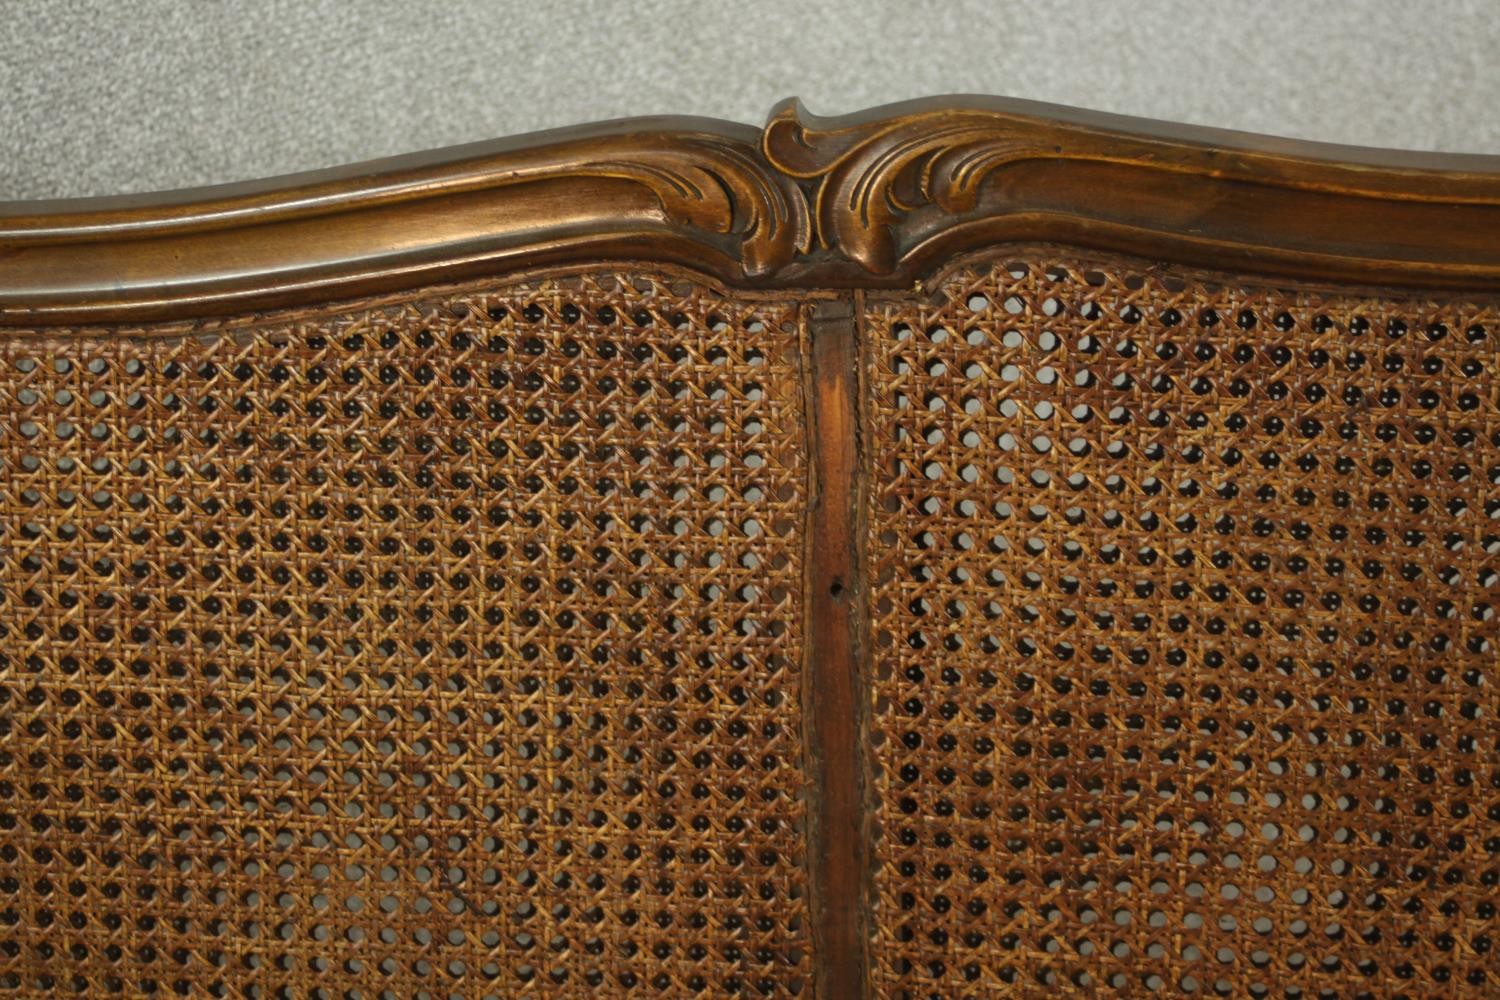 An early 20th century Continental carved walnut three seater bergere sofa, upholstered in gold - Image 13 of 18